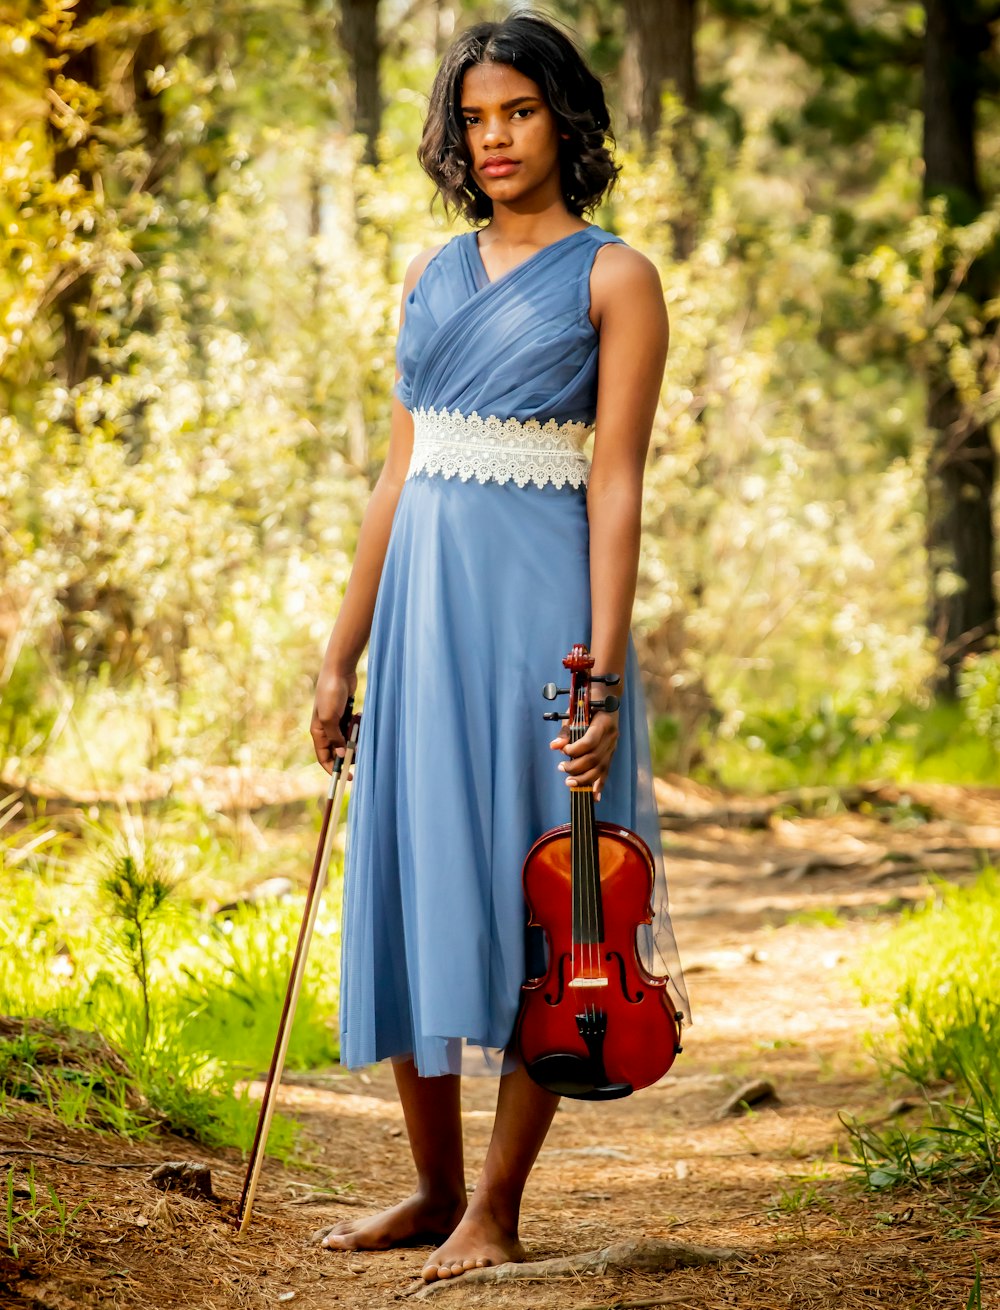 A woman in a blue dress holding a violin photo – Free Human Image on  Unsplash